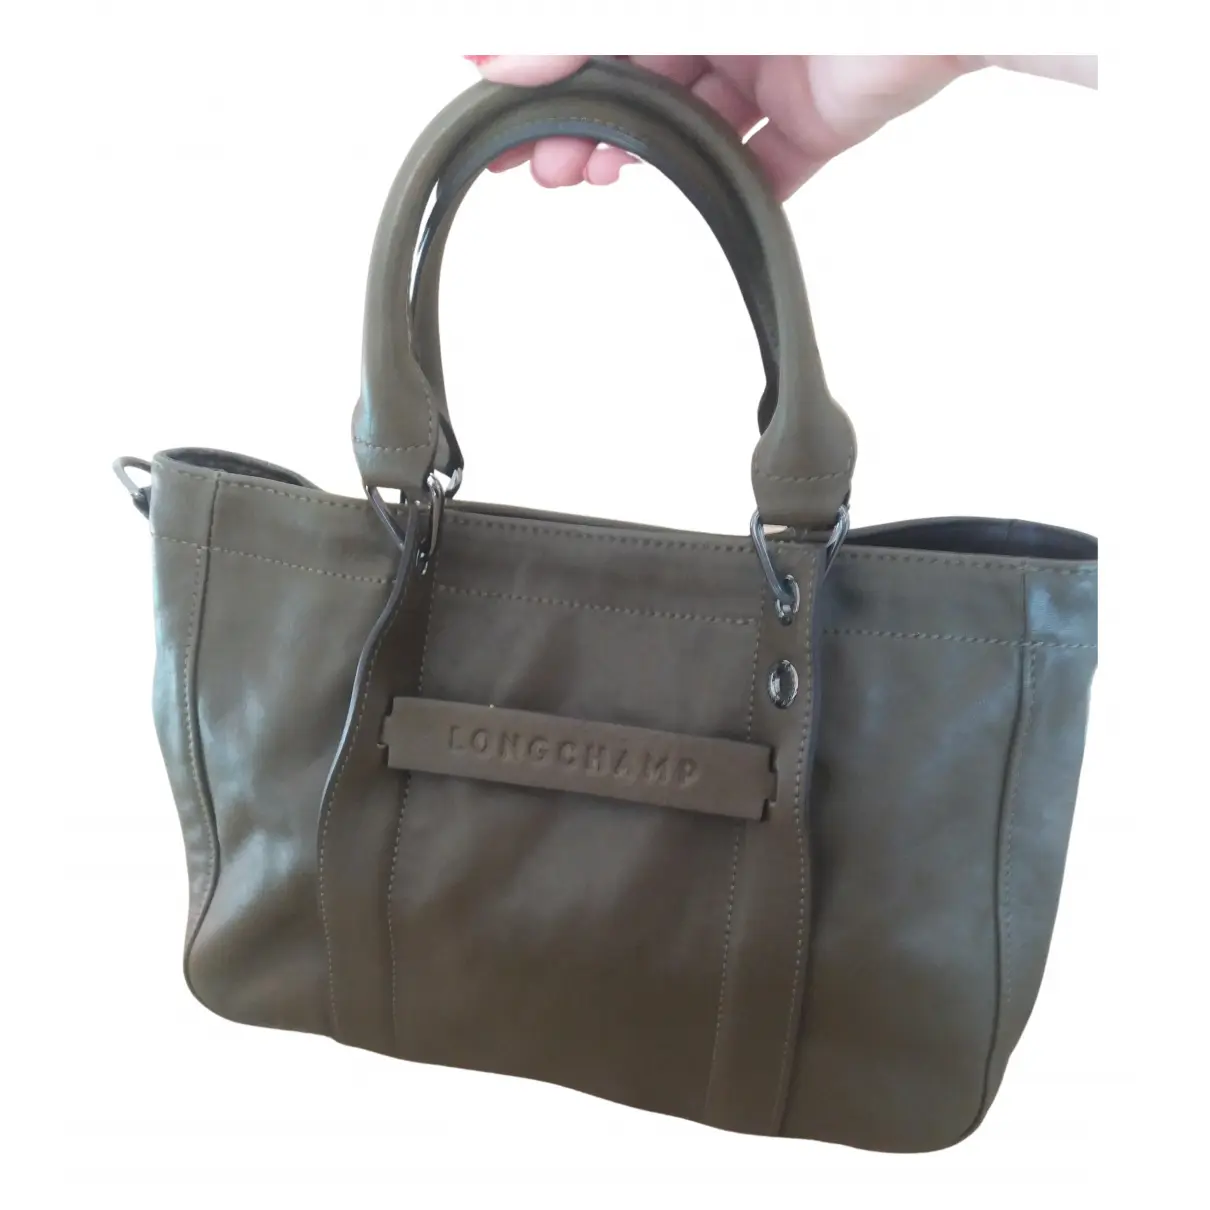 Buy Longchamp 3D leather tote online